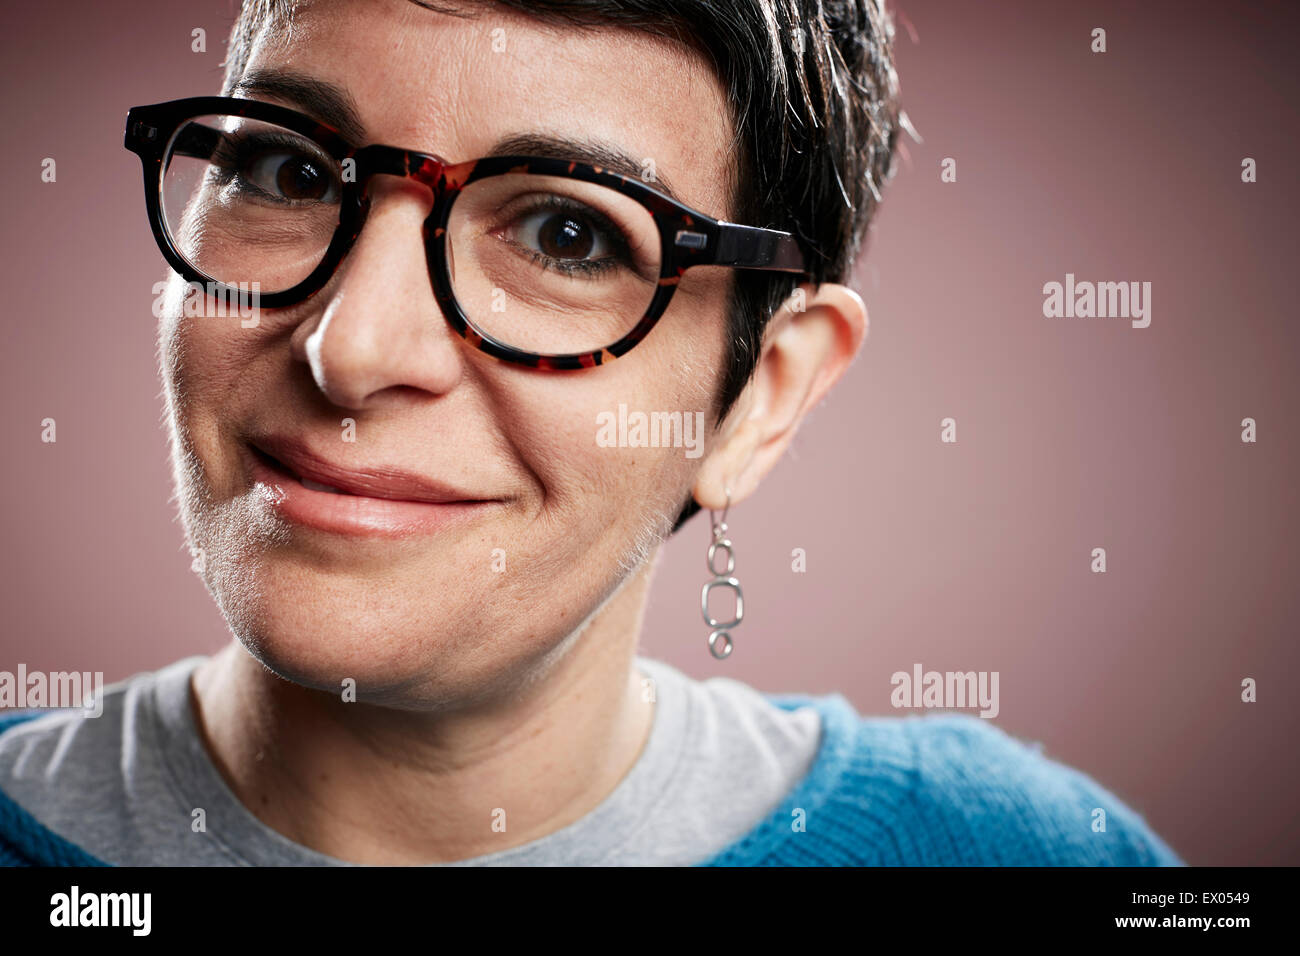 Close up studio portrait of mature woman wearing spectacles Stock Photo